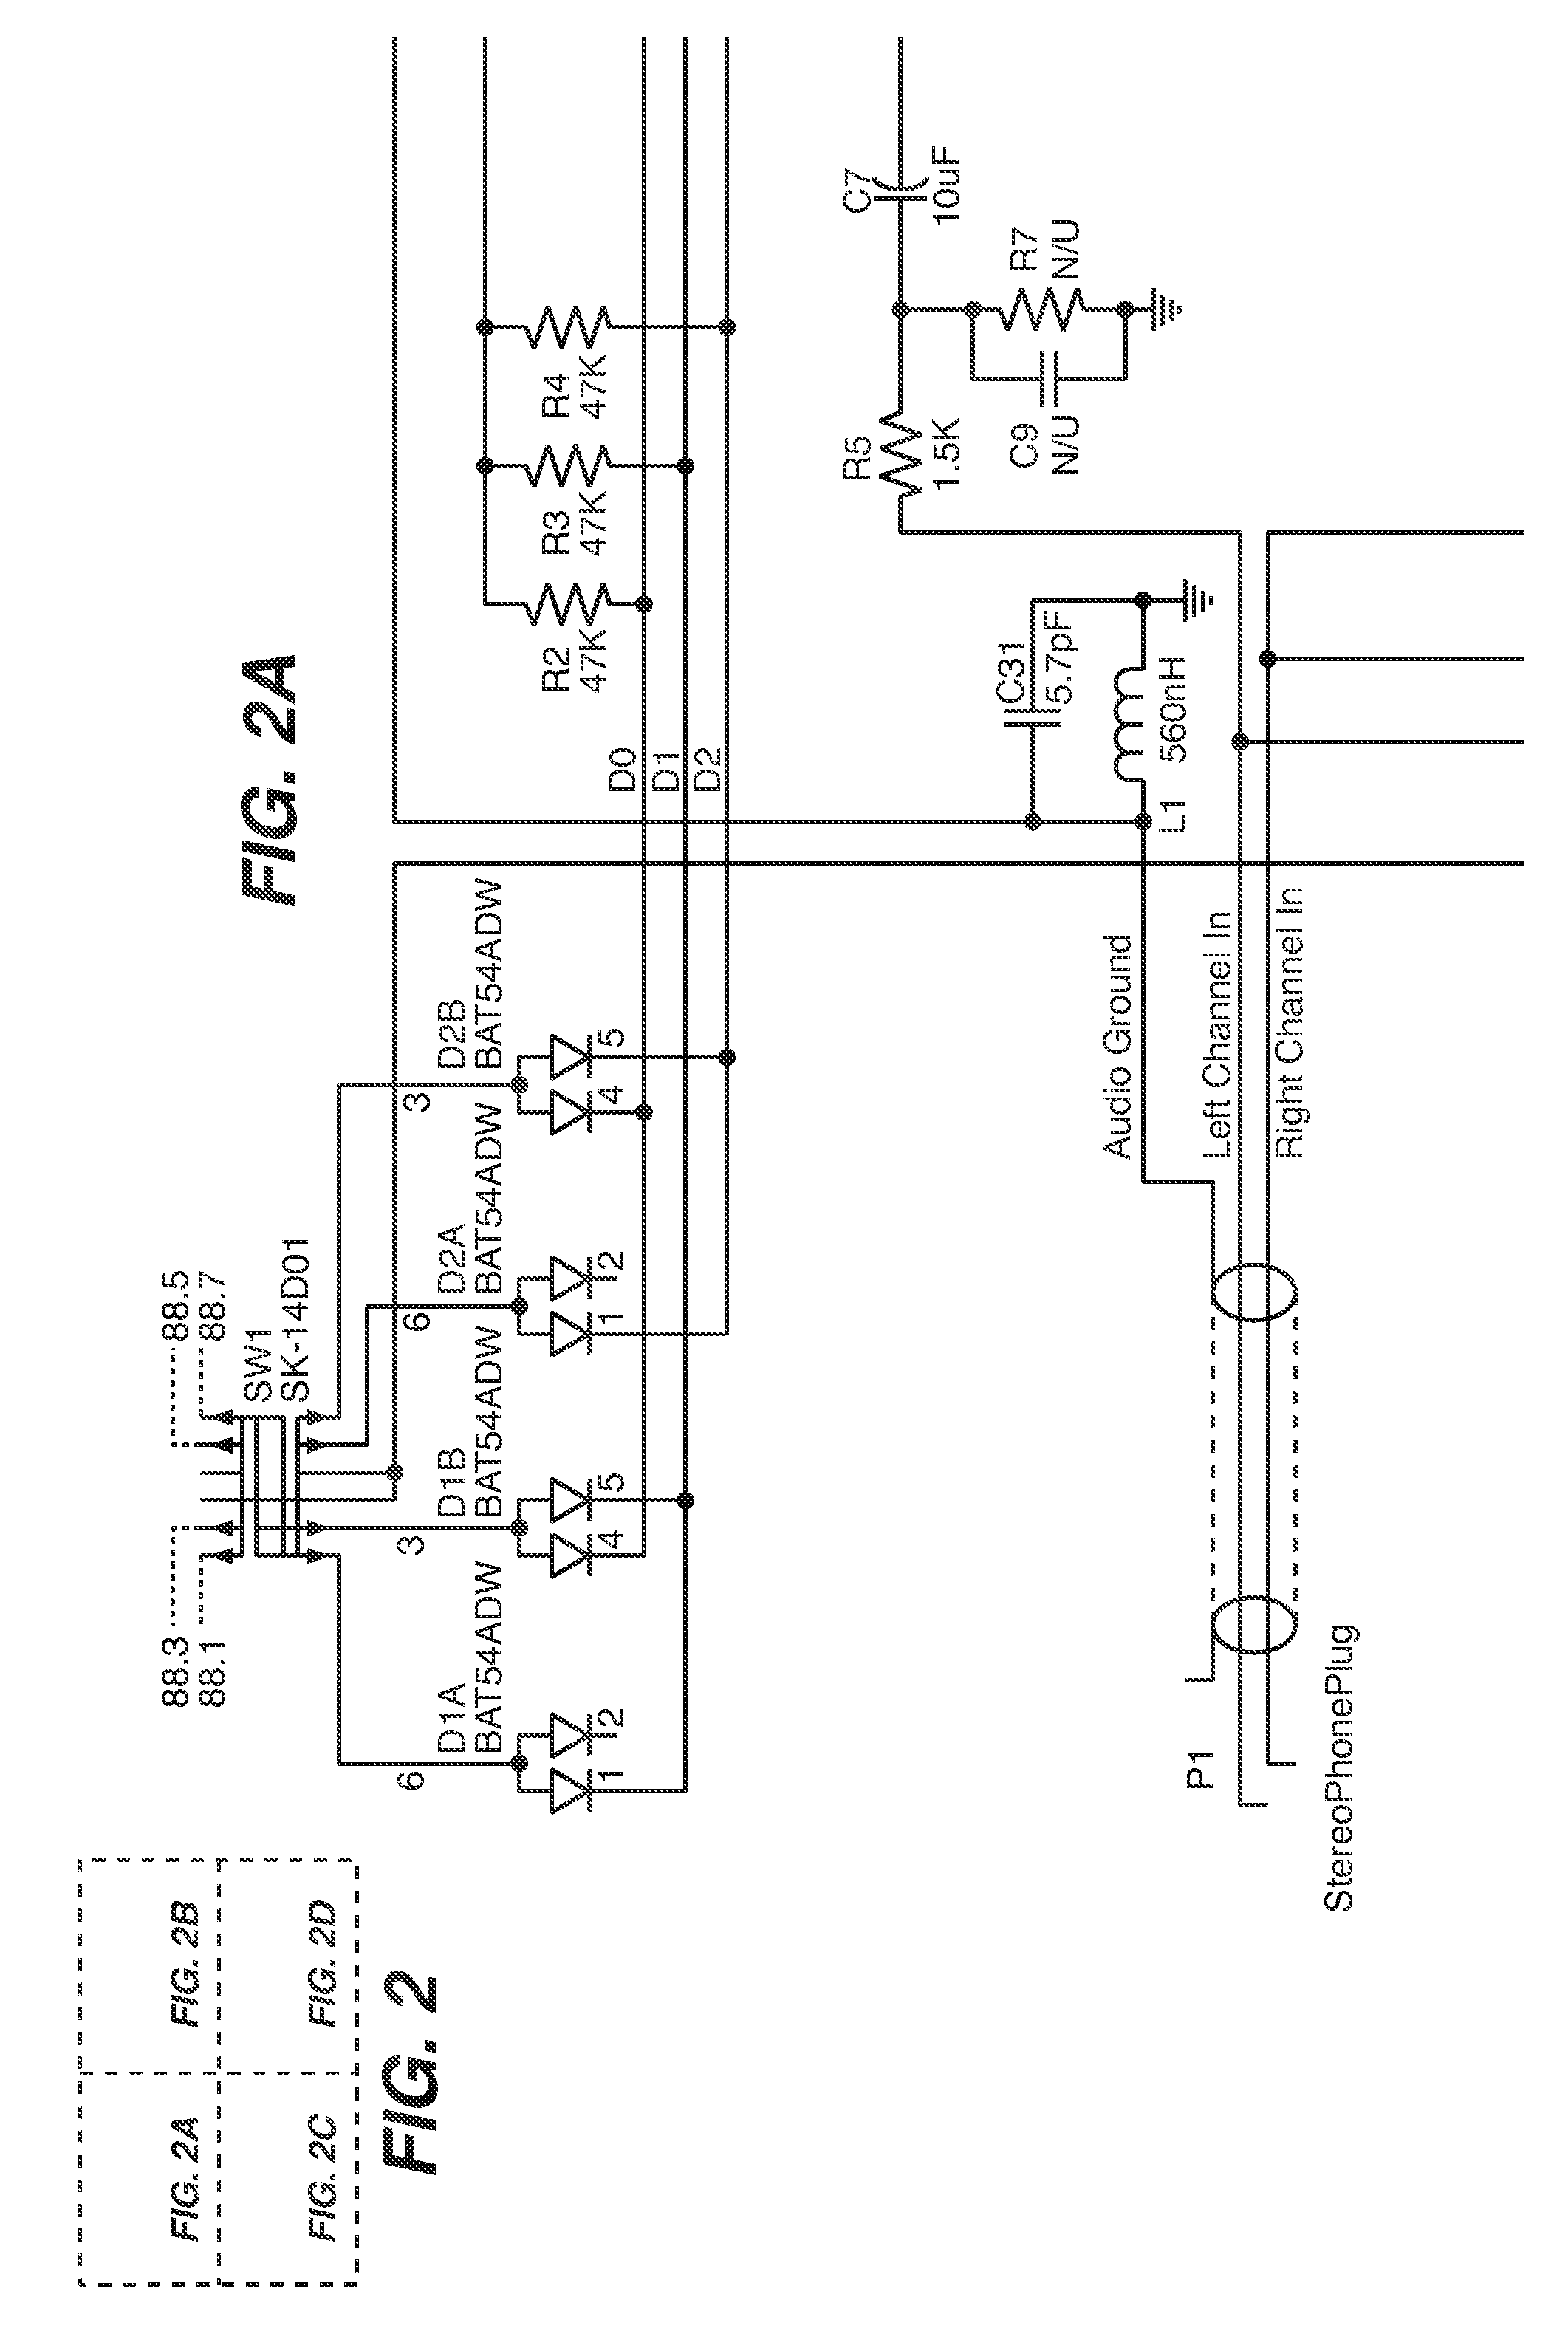 Method and apparatus for sensing a signal absence of audio and automatically entering low power mode